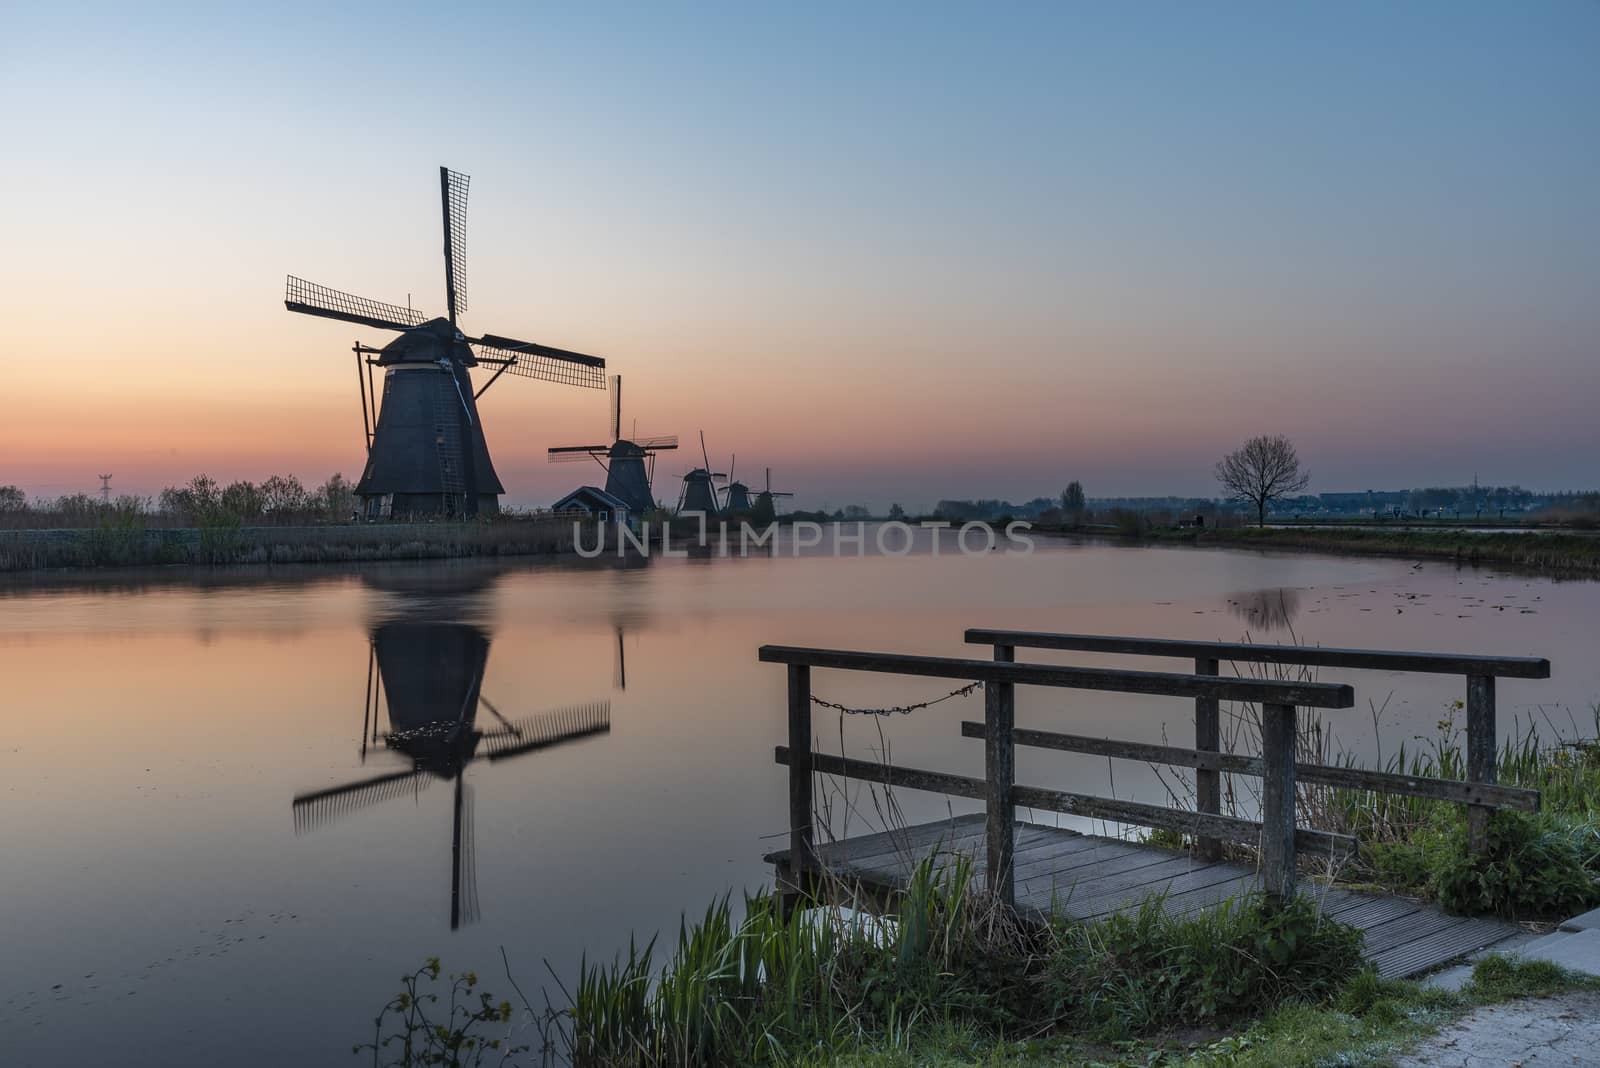 Twight light sunrise on the Unesco heritage windmill silhouette at the middle of the canal, Alblasserdam, Netherlands by ankorlight